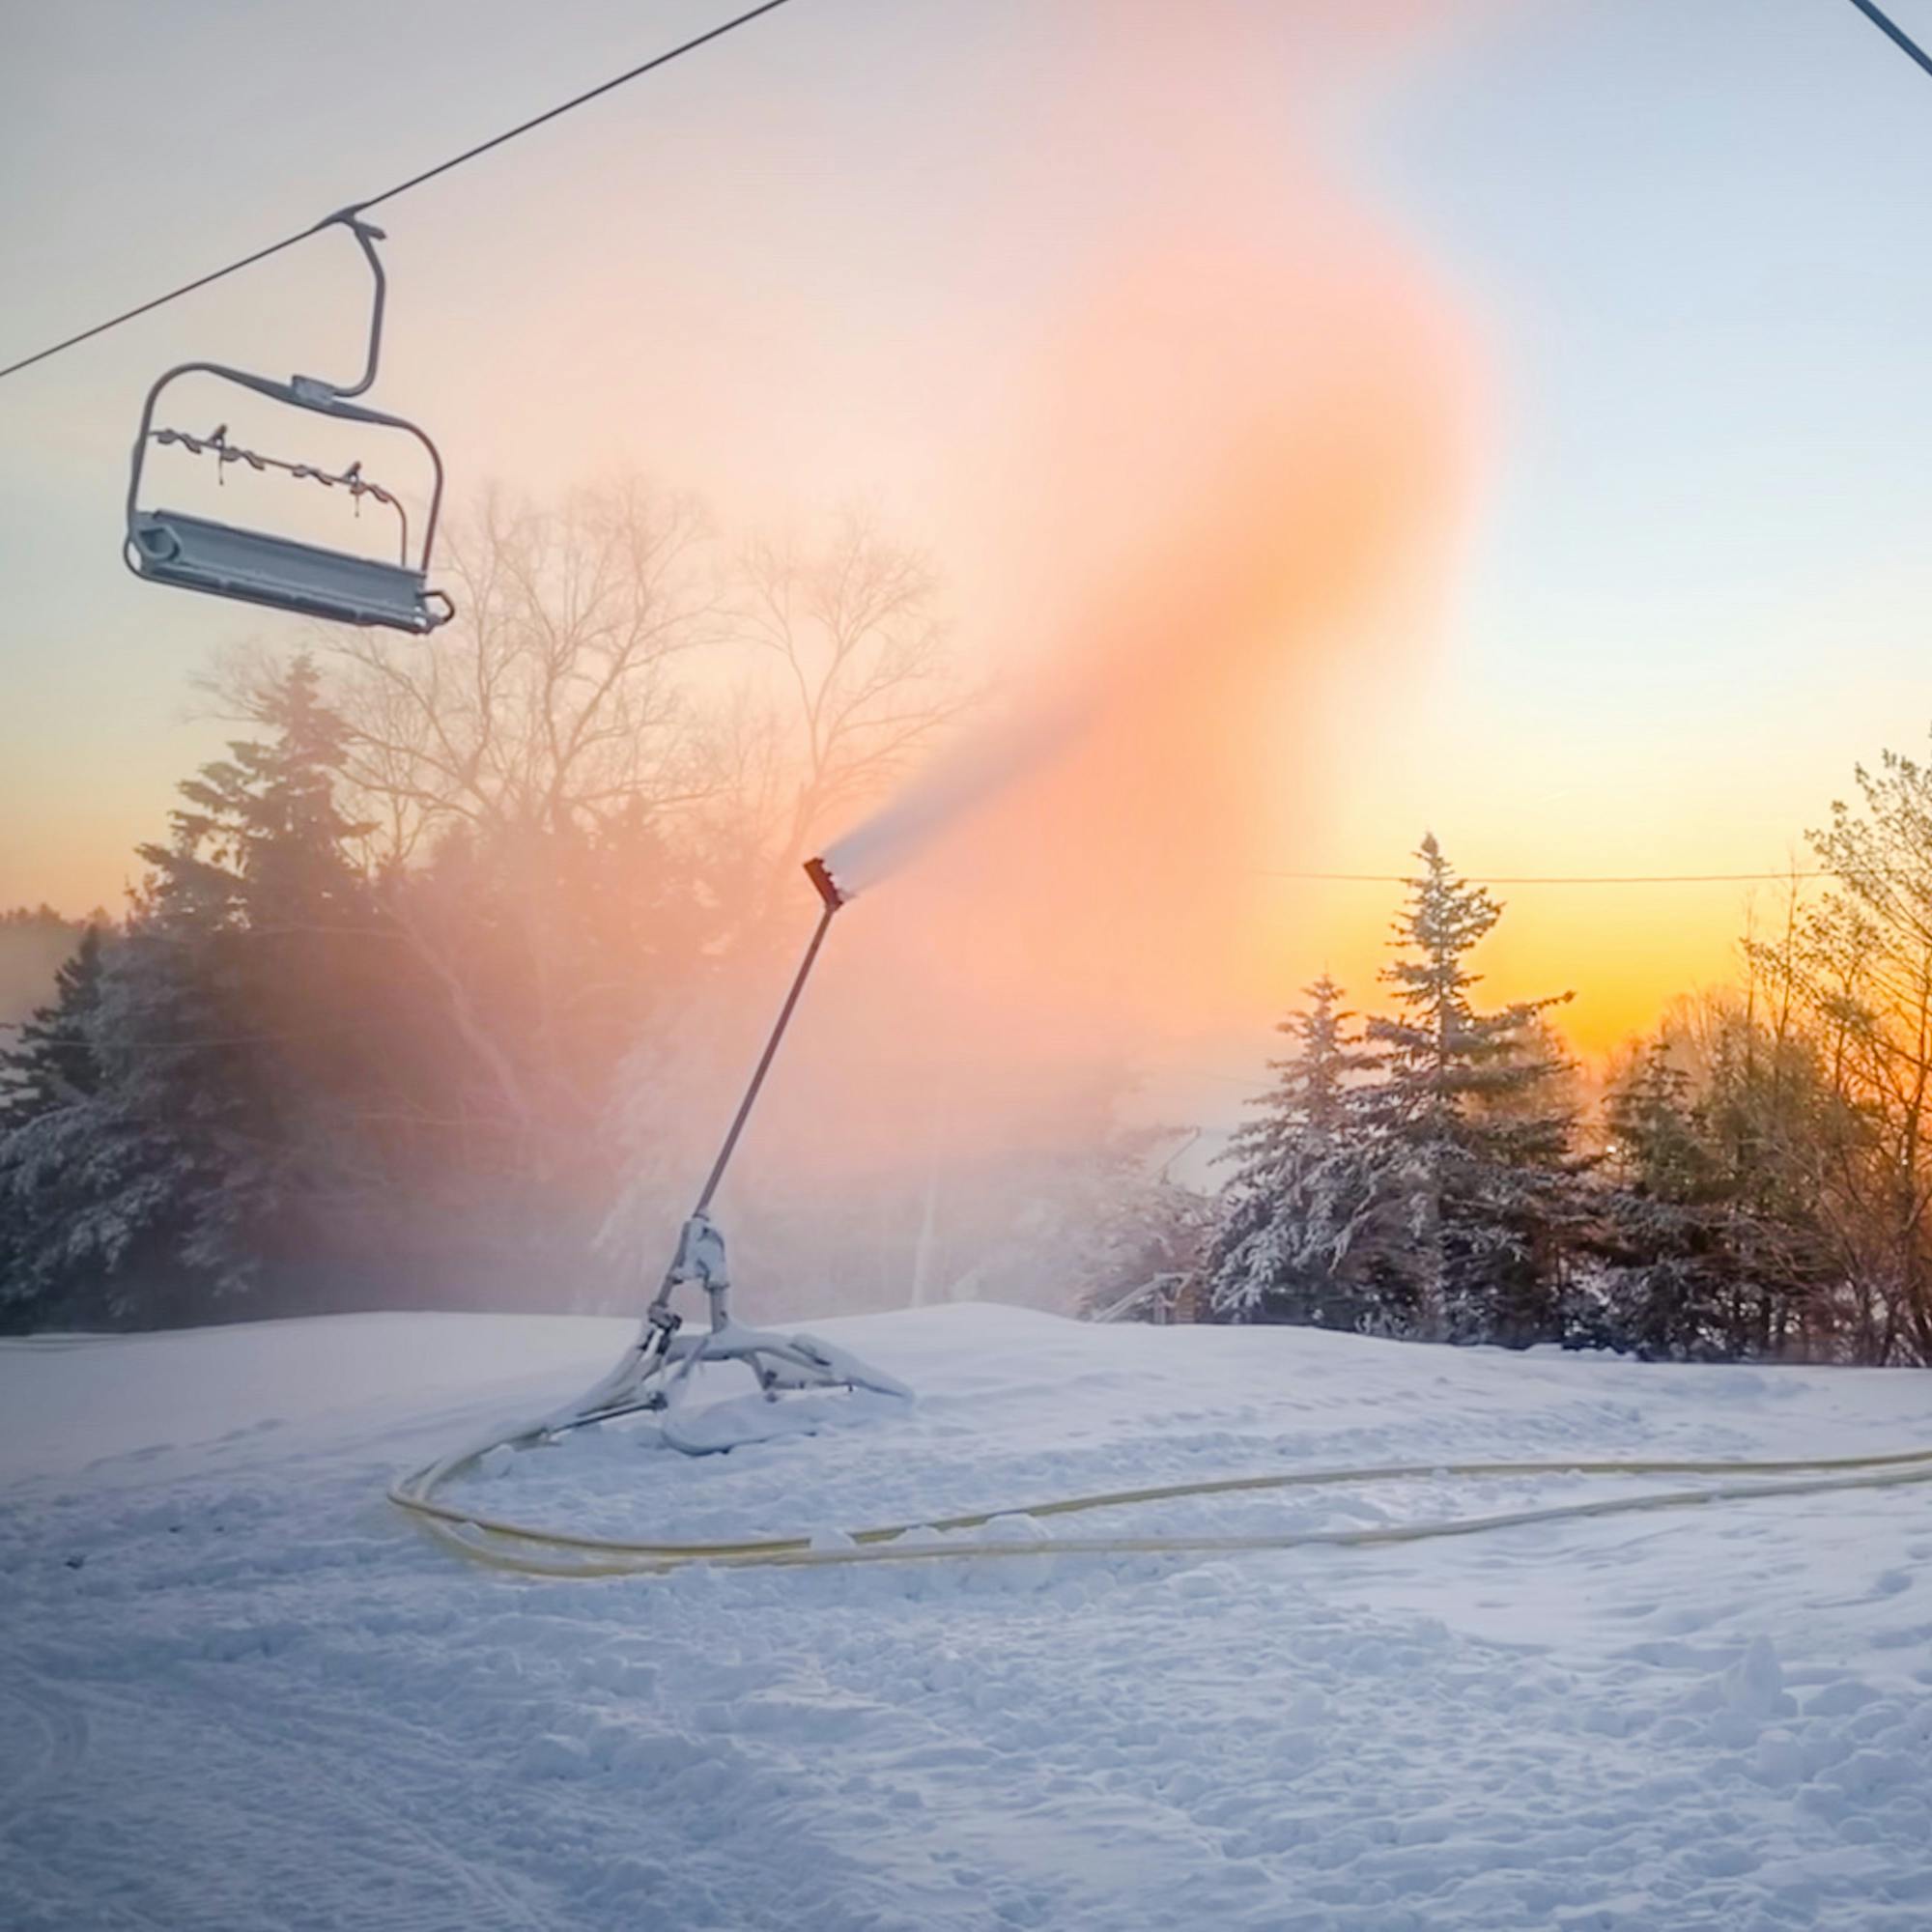 Scenery shot: Early morning sun rising behind the trees. A snow gun blowing snow in the center, and an empty chairlift chair in the top left. 